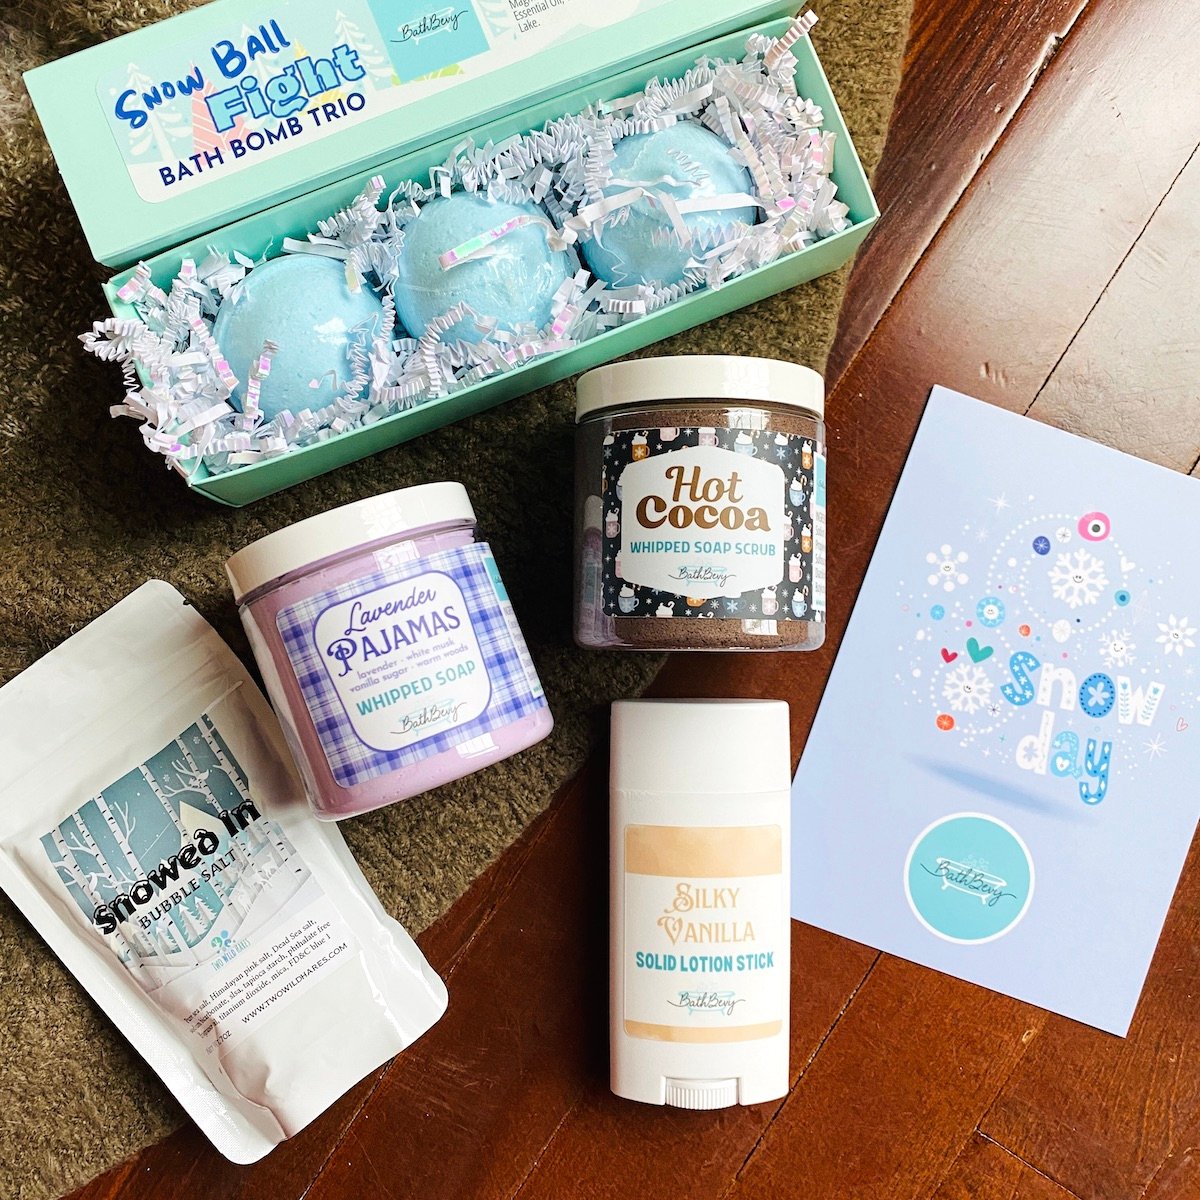 Subscription box coupons